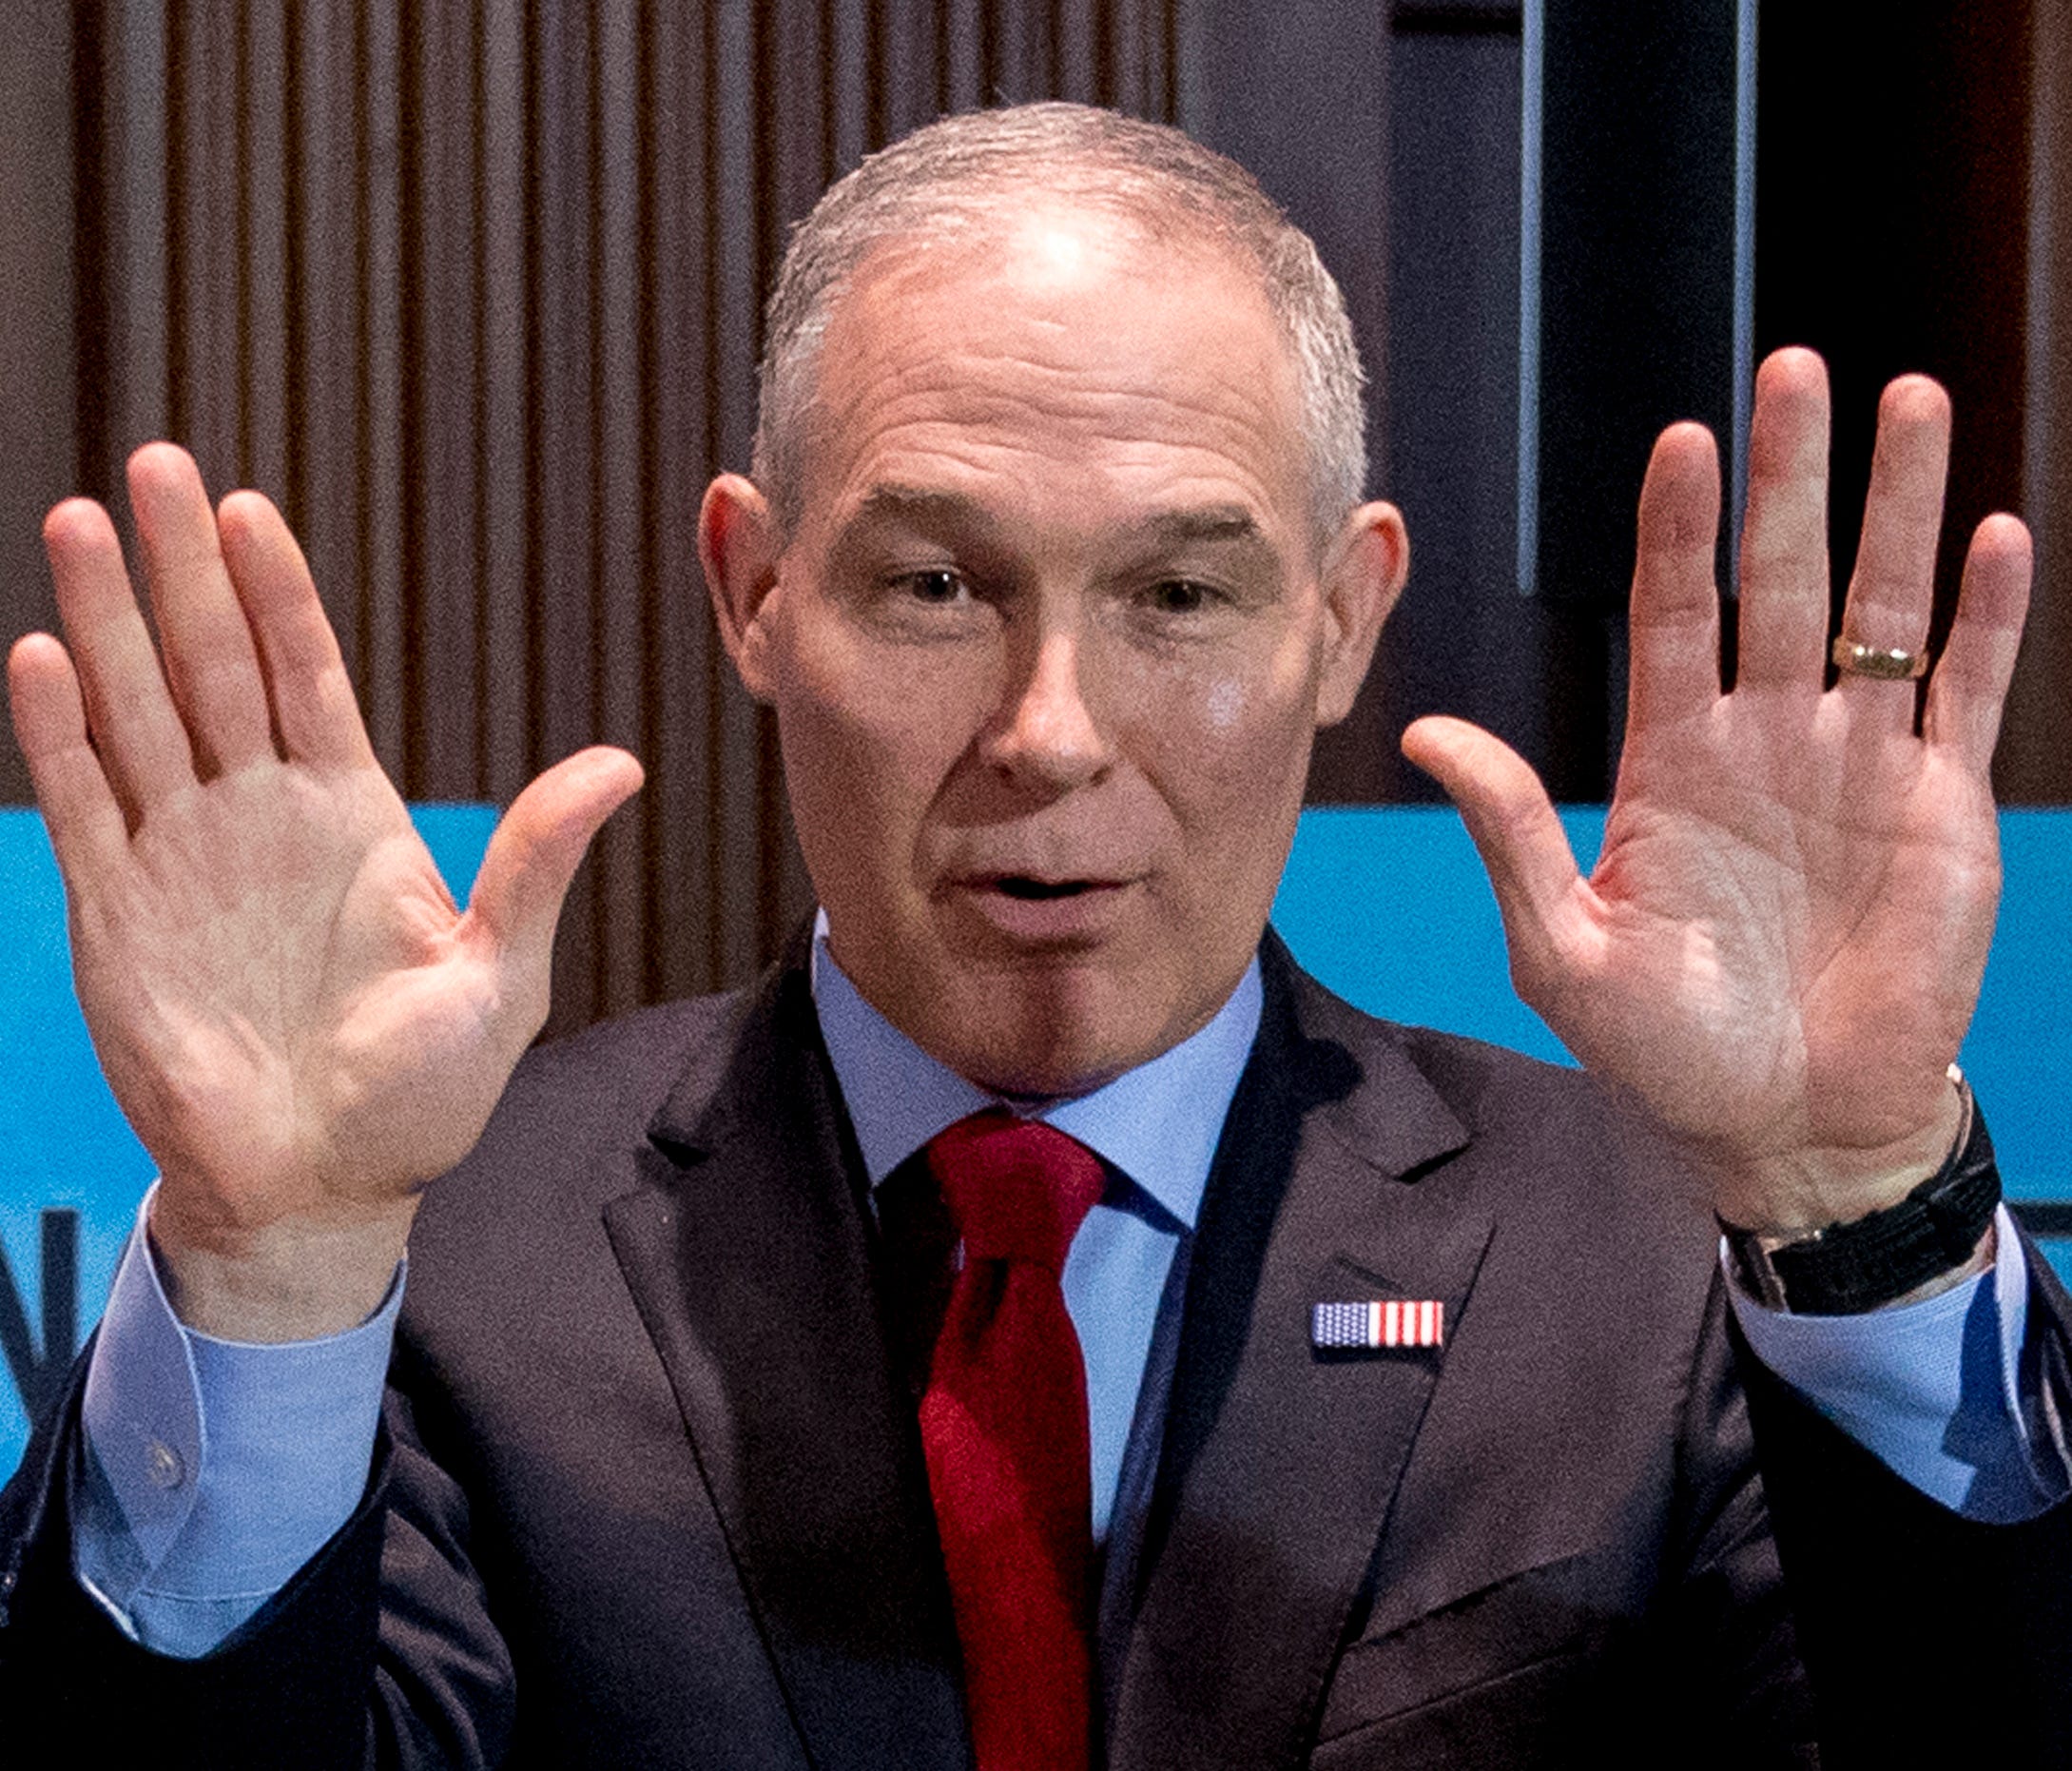 Environmental Protection Agency Administrator Scott Pruitt waves to members of the audience as he arrives for a news conference at the Environmental Protection Agency in Washington, April 3, 2018.